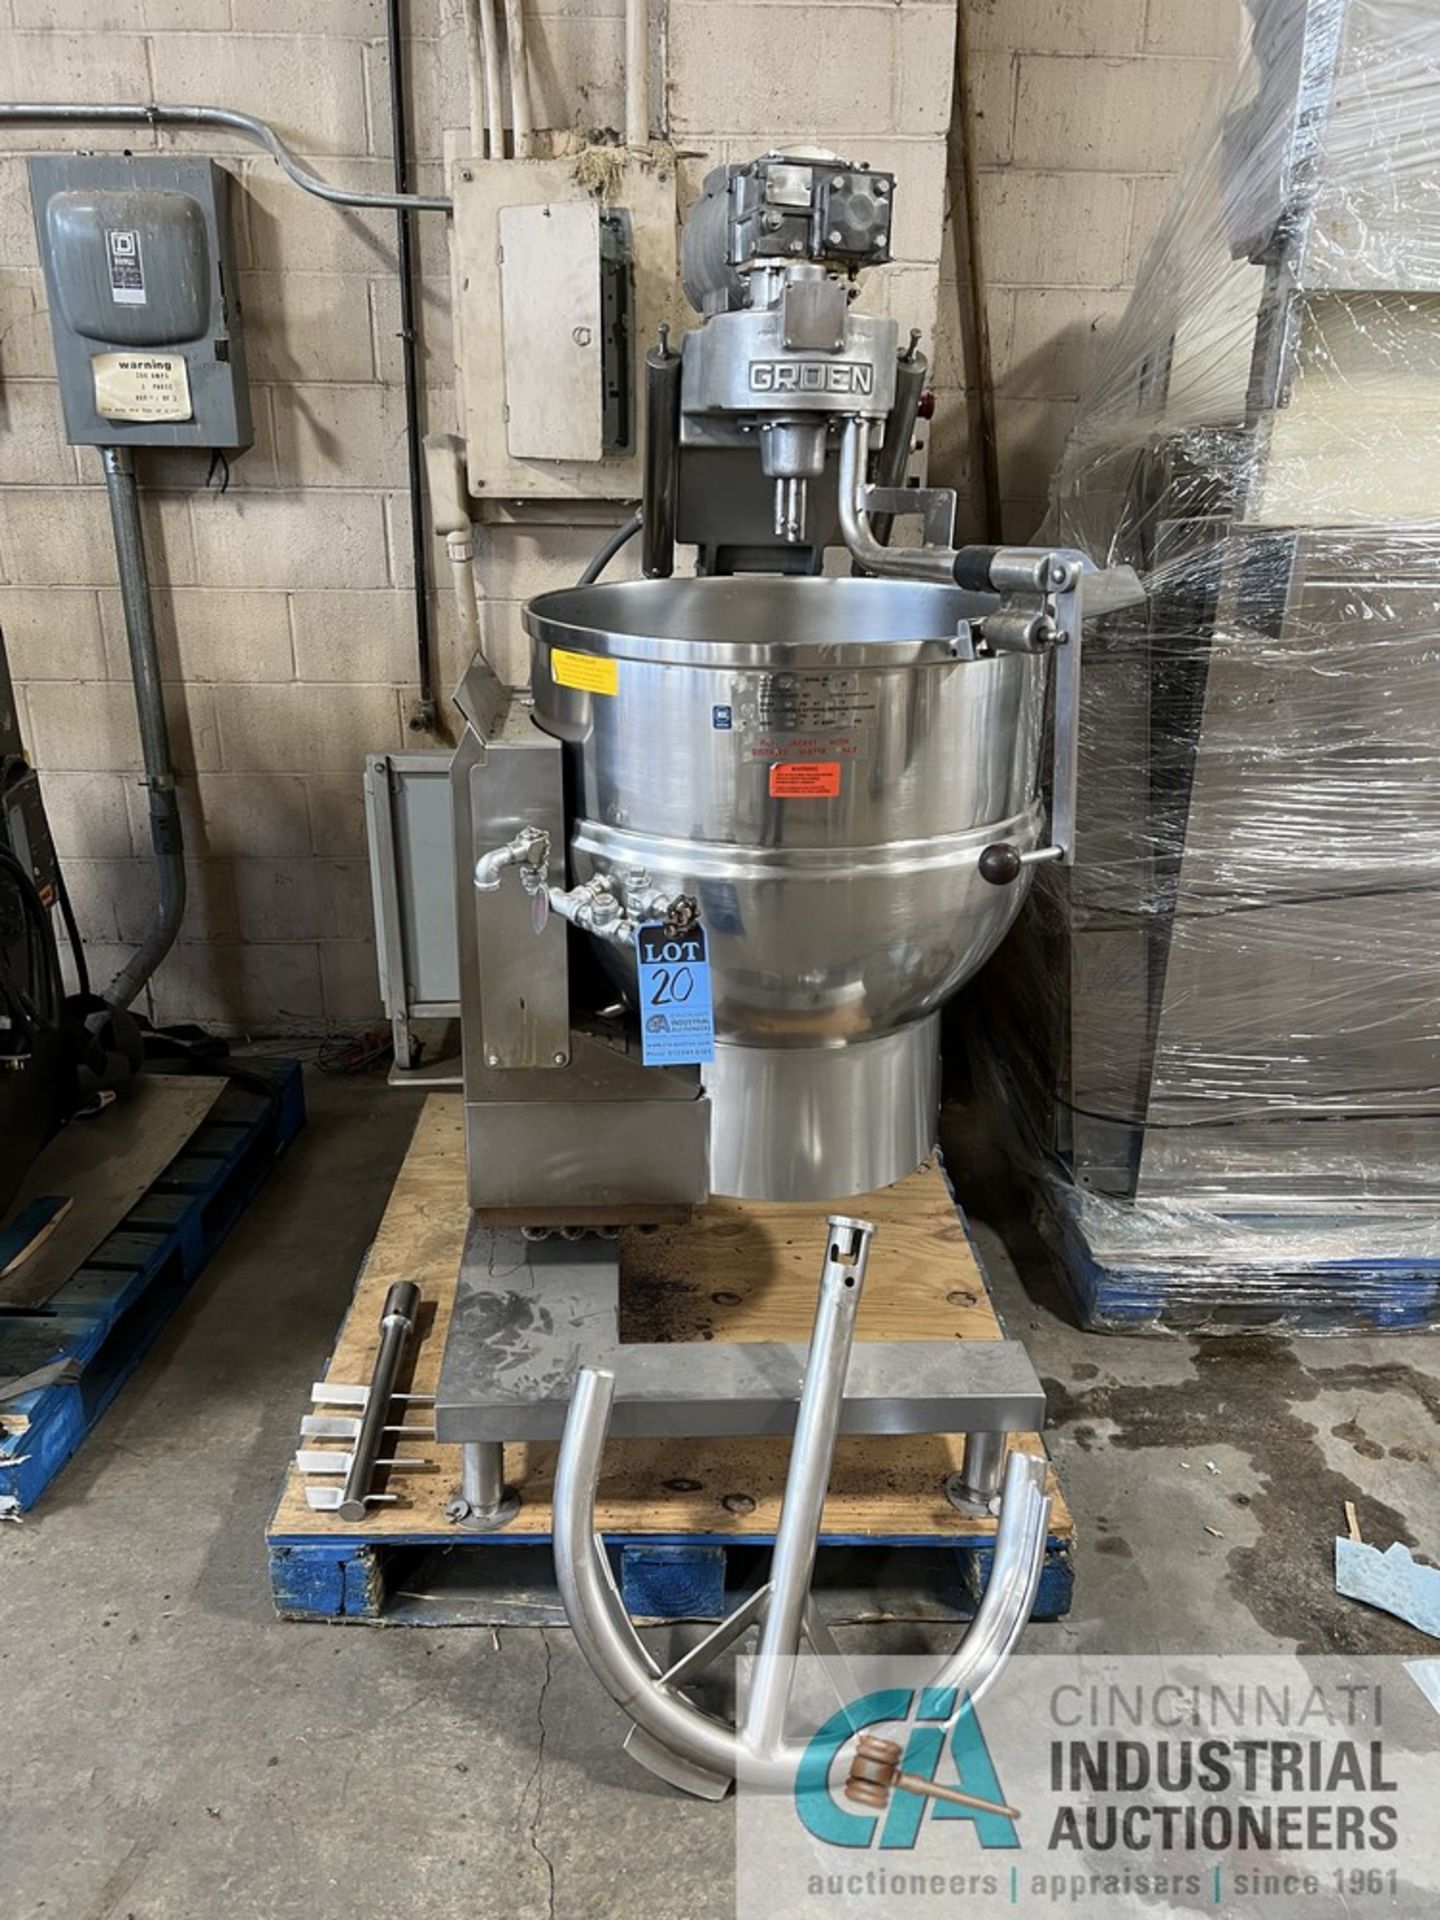 40 GALLON GROEN MODEL DH/1-40 TA 3 NATURAL GAS FIRED STEAM JACKETED TILTING KETTLE MIXER - Image 2 of 19